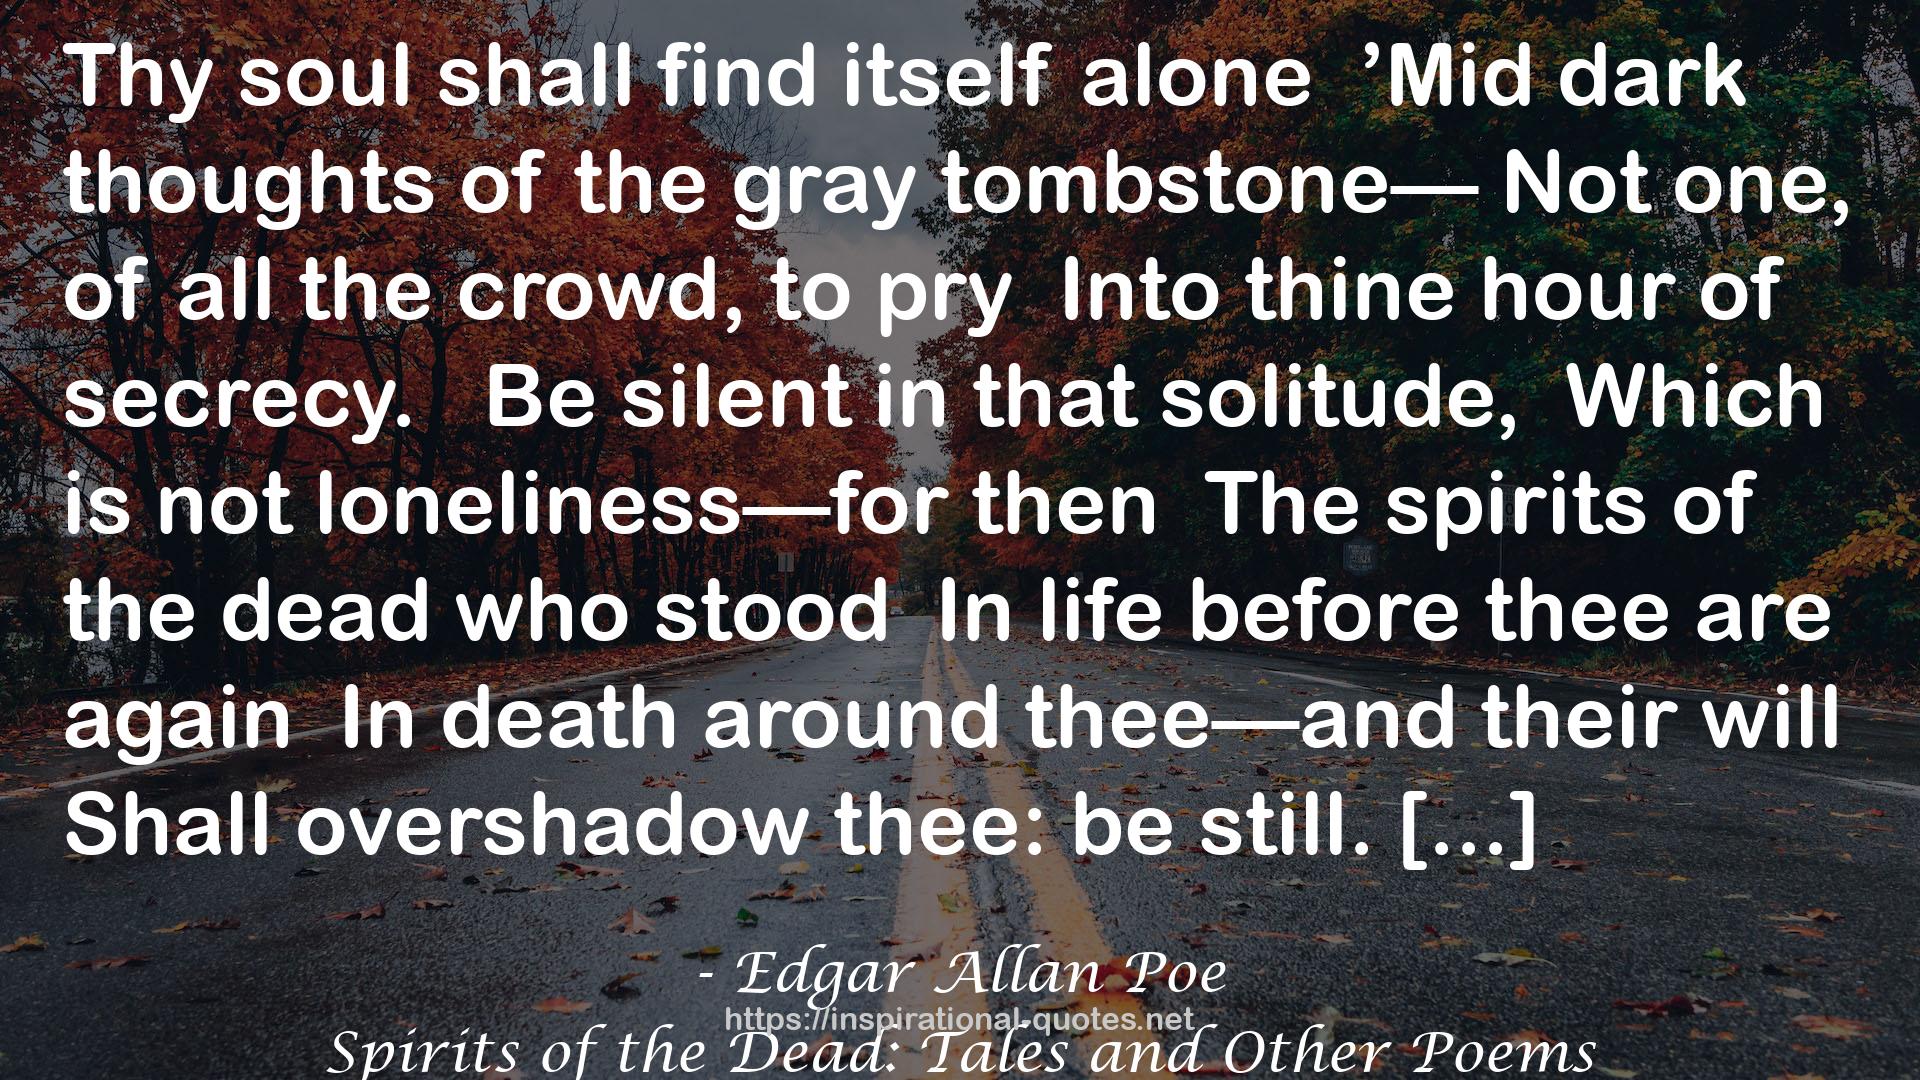 Spirits of the Dead: Tales and Other Poems QUOTES